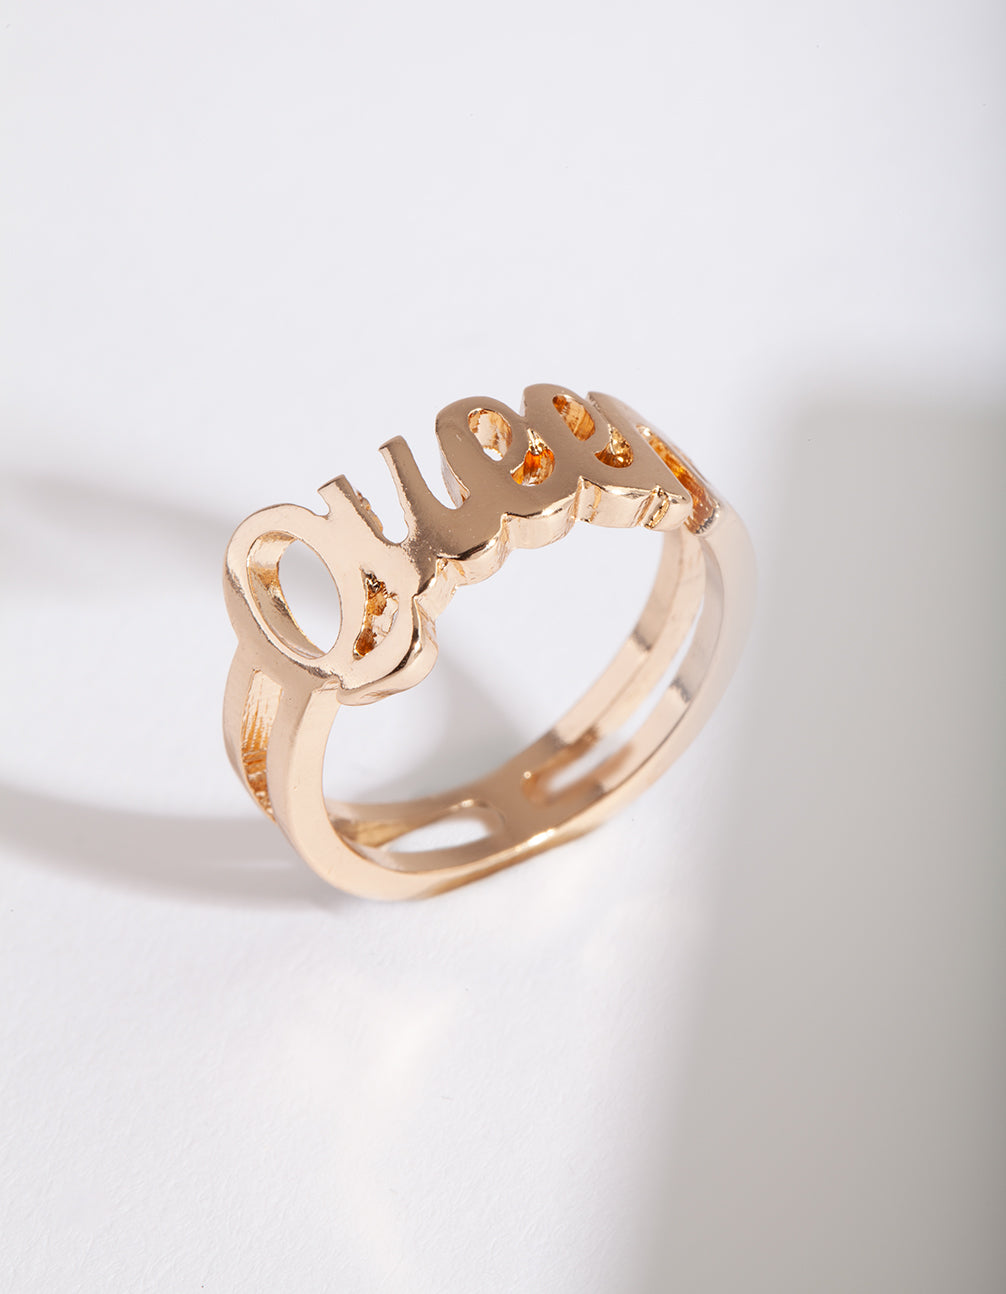 PERSONALIZED 14K ROUND NAME RING 3D ANY NAME UP TO 9 LETTERS | eBay